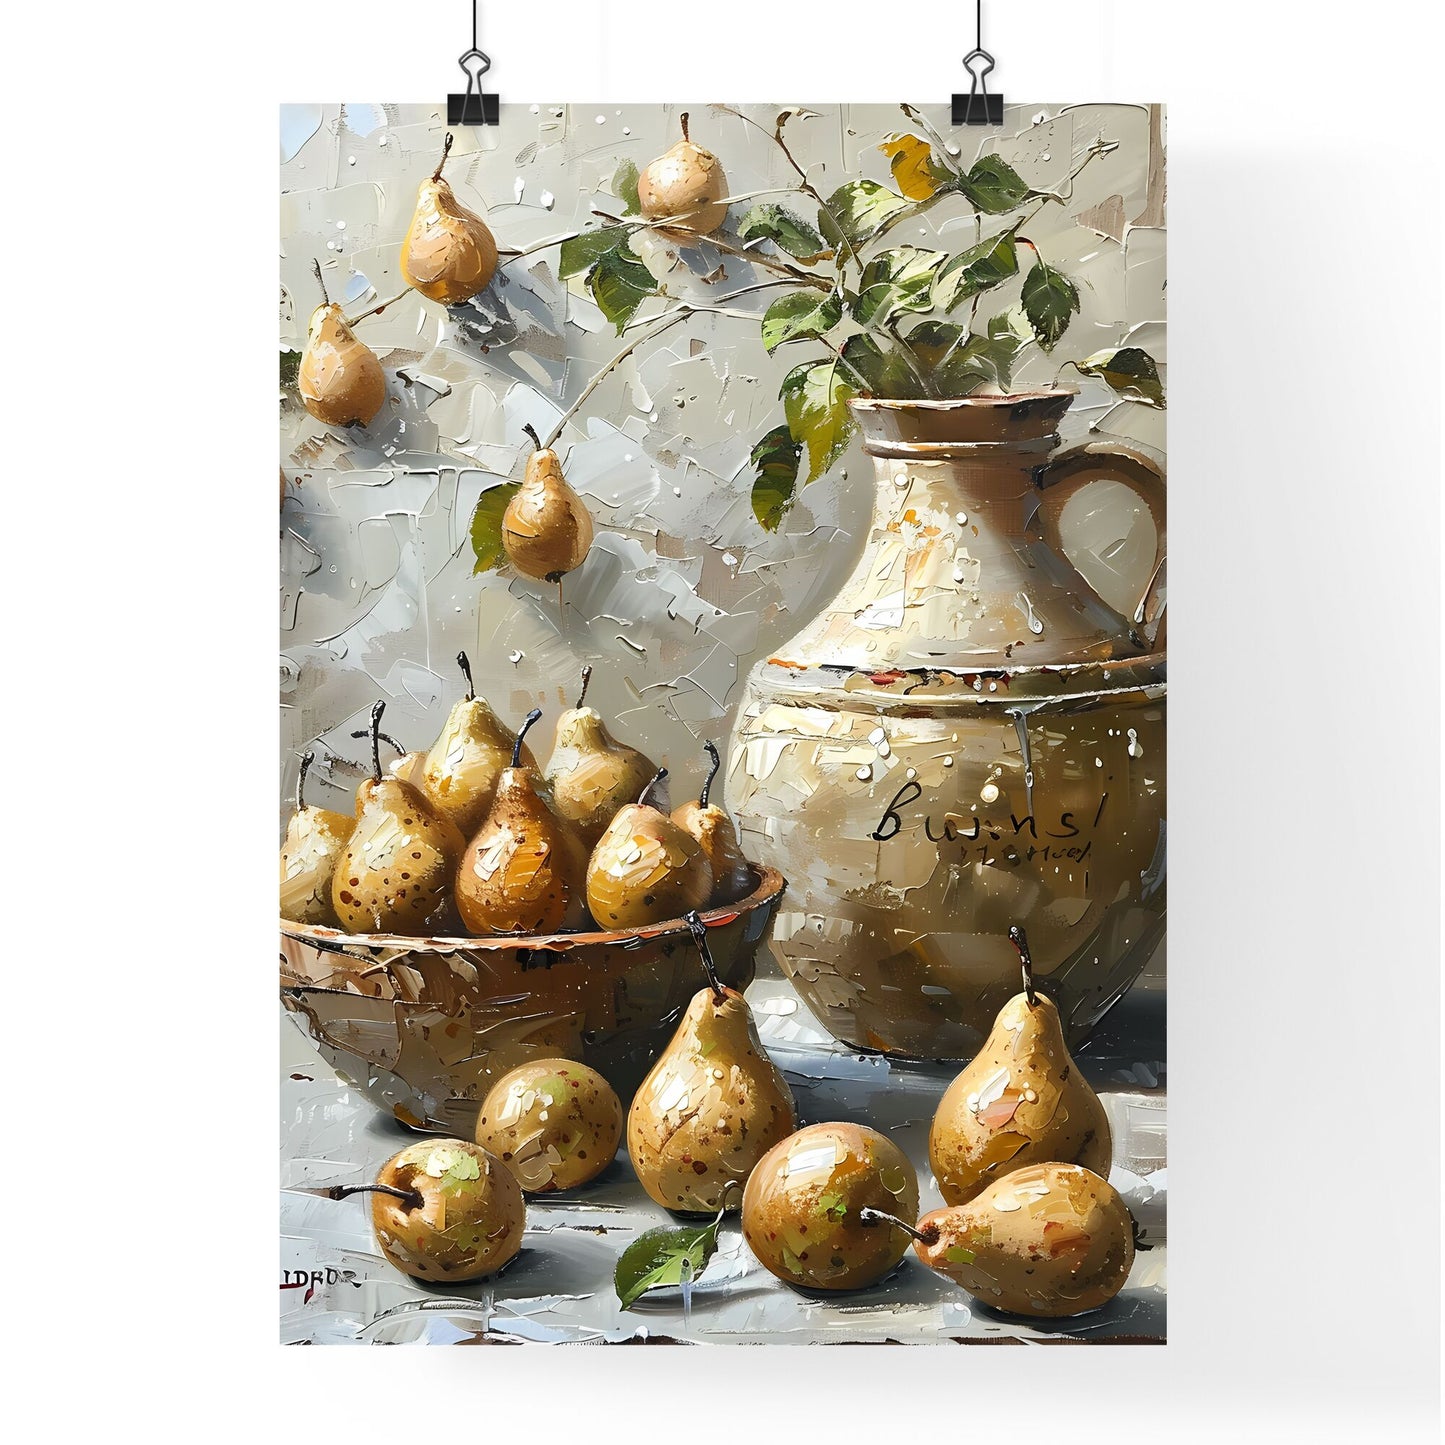 Impressionistic Pears on Counter in Rustic Bowl, Muted Colors, Dynamic Composition, Oil Painting Art Default Title